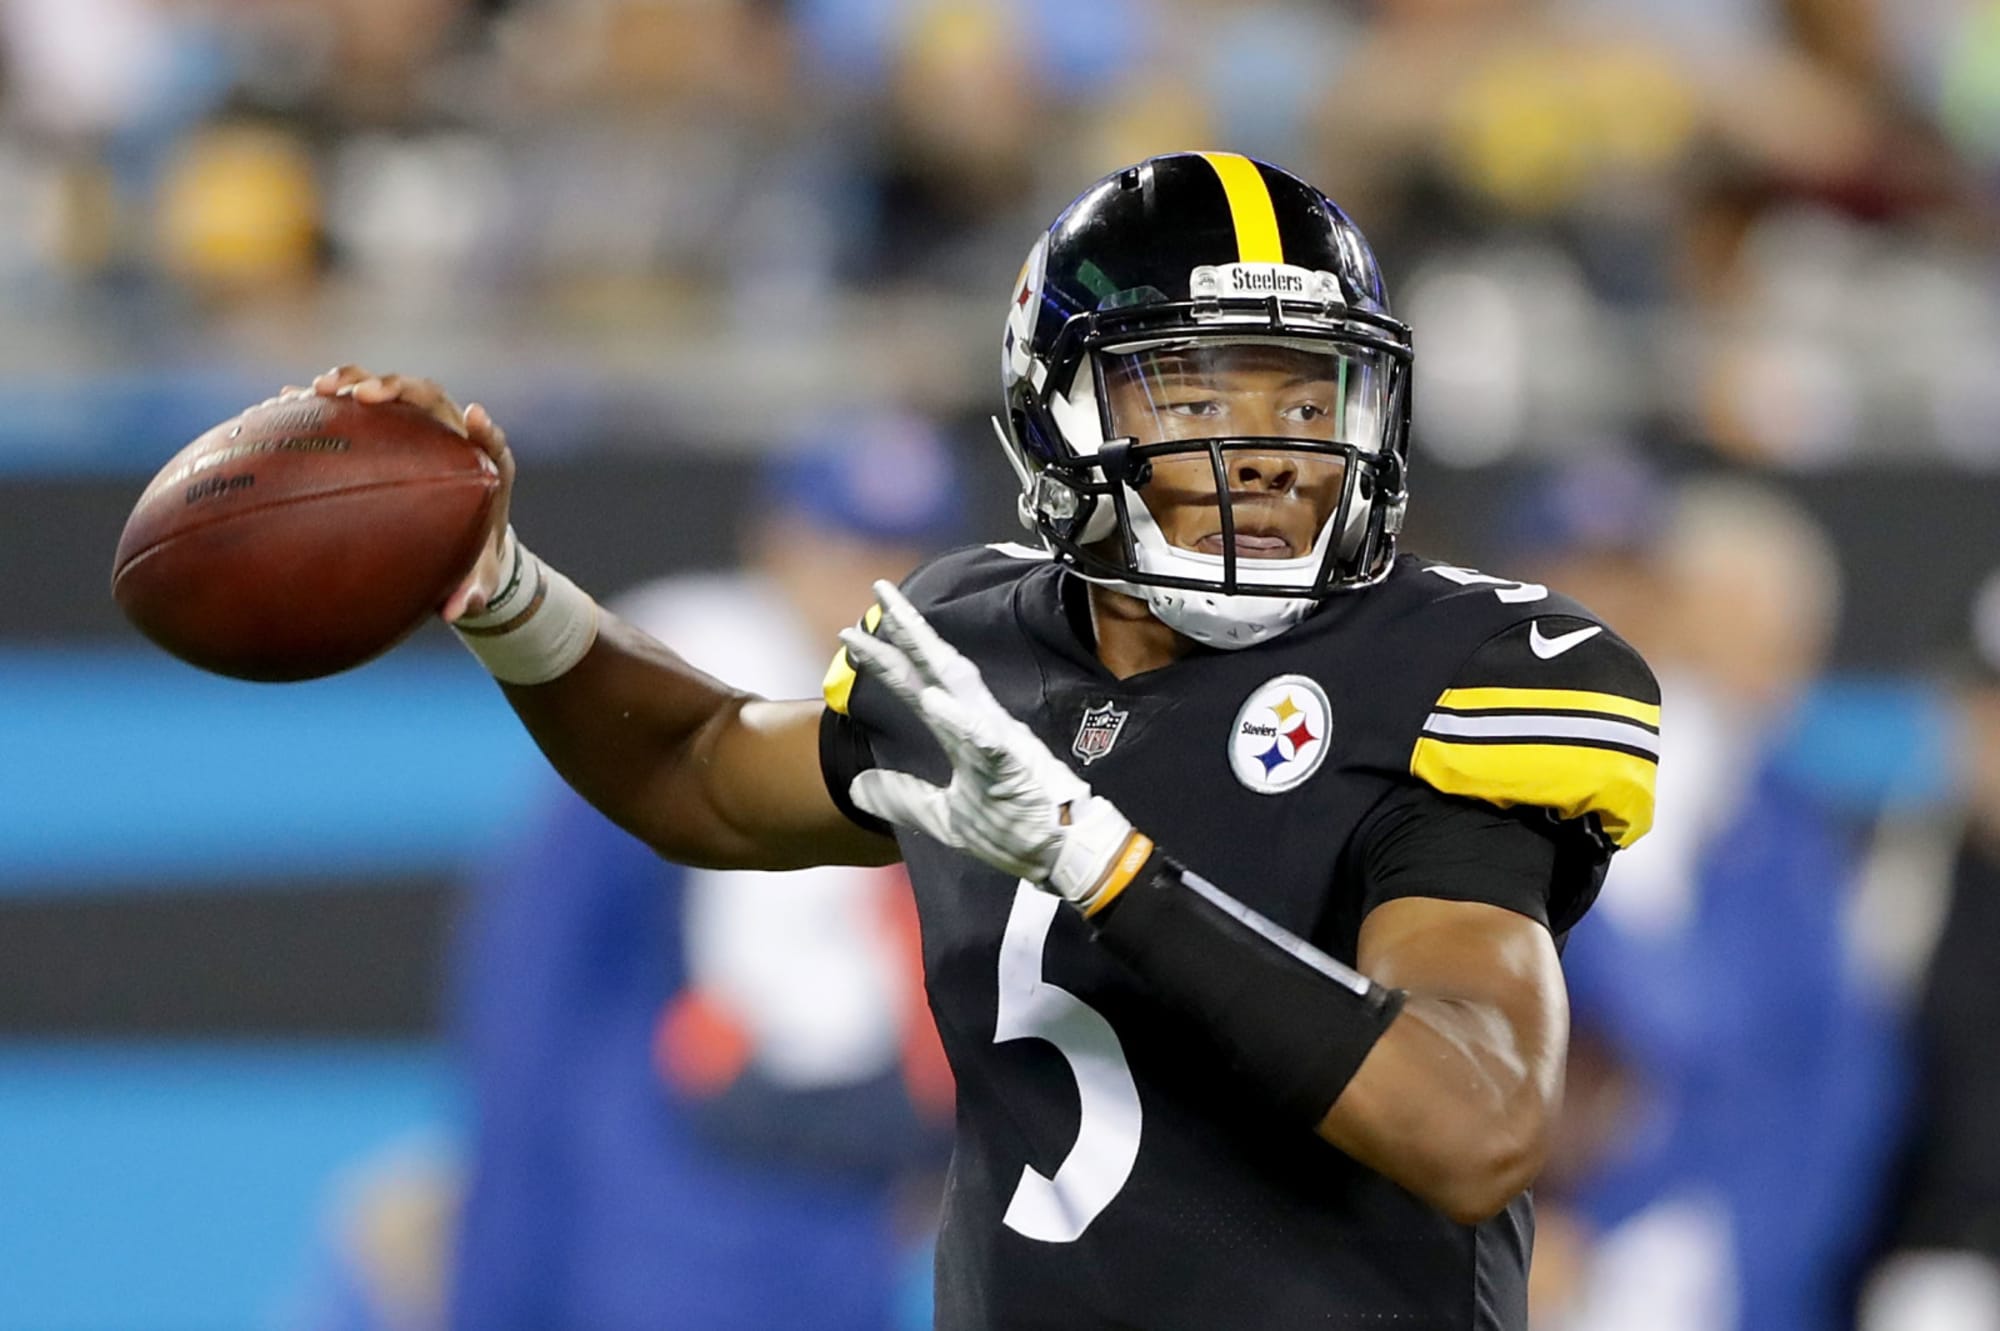 Josh Dobbs' career won't end with being cut by the Pittsburgh Steelers